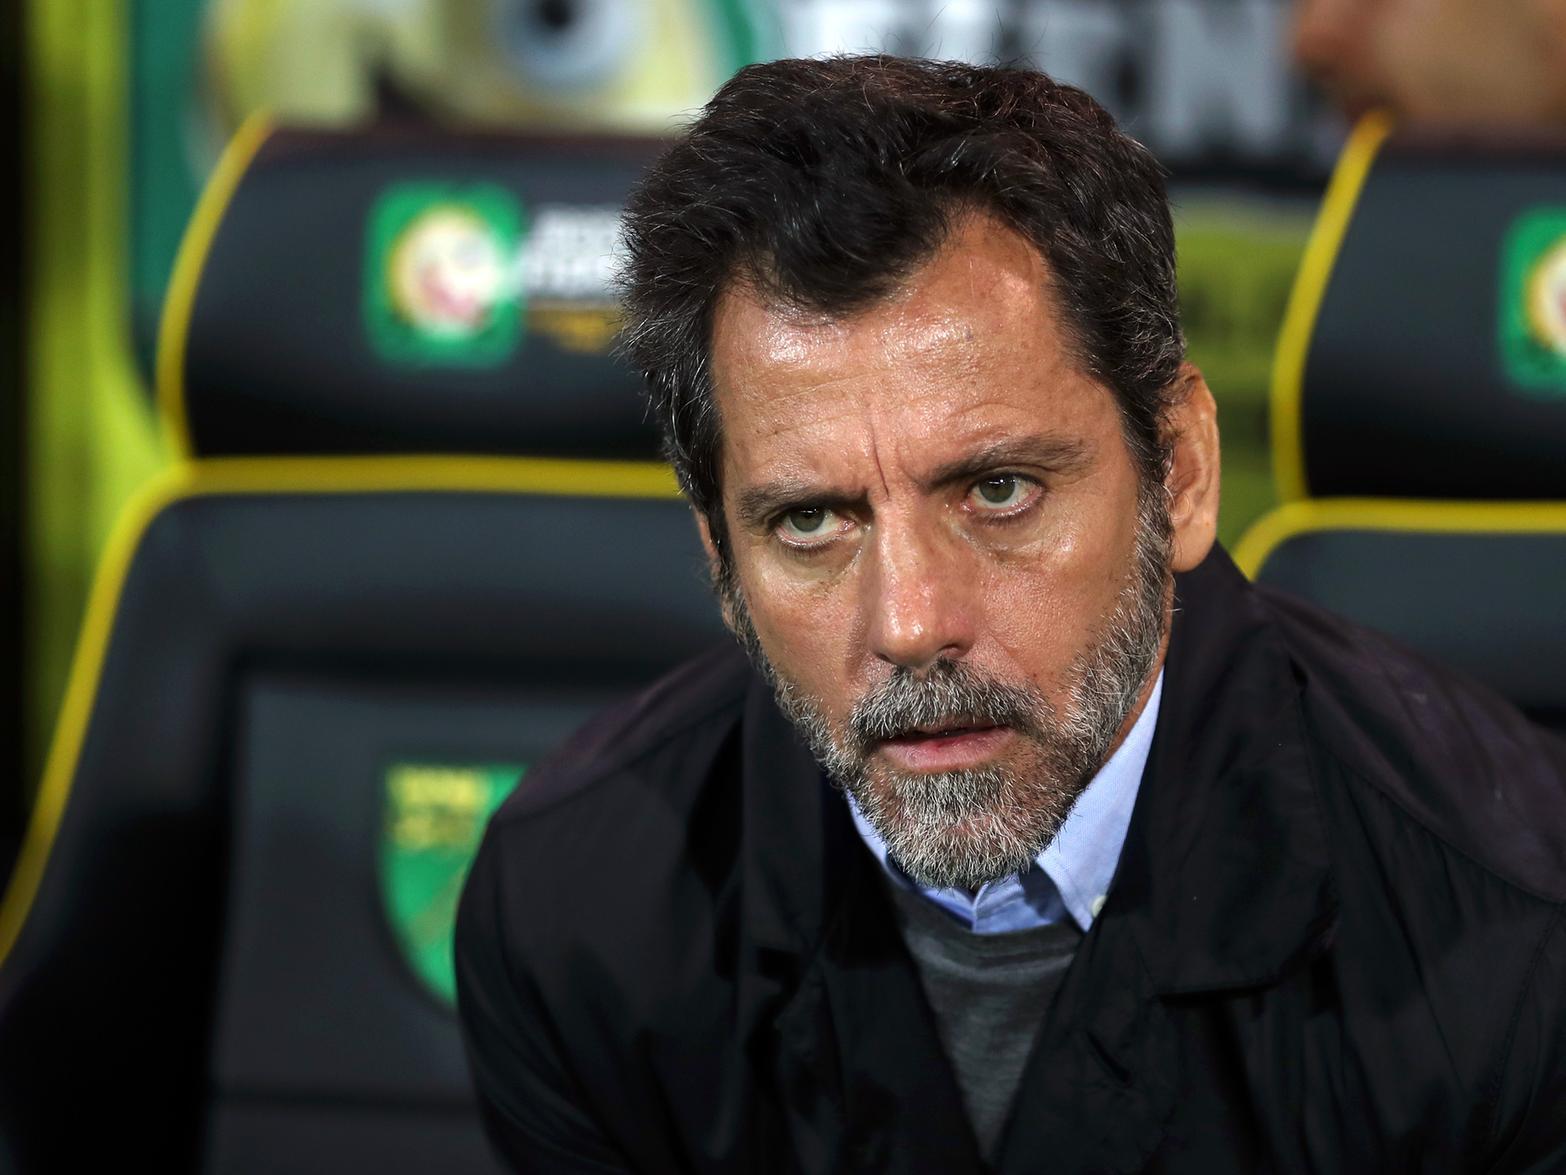 Watford are hoping to follow up their win over Norwich with one against Burnley. Their manager has hit back at claims that he's a defensive coach, and hinted that he'll look to play a 4-4-2 once his side hit their stride.